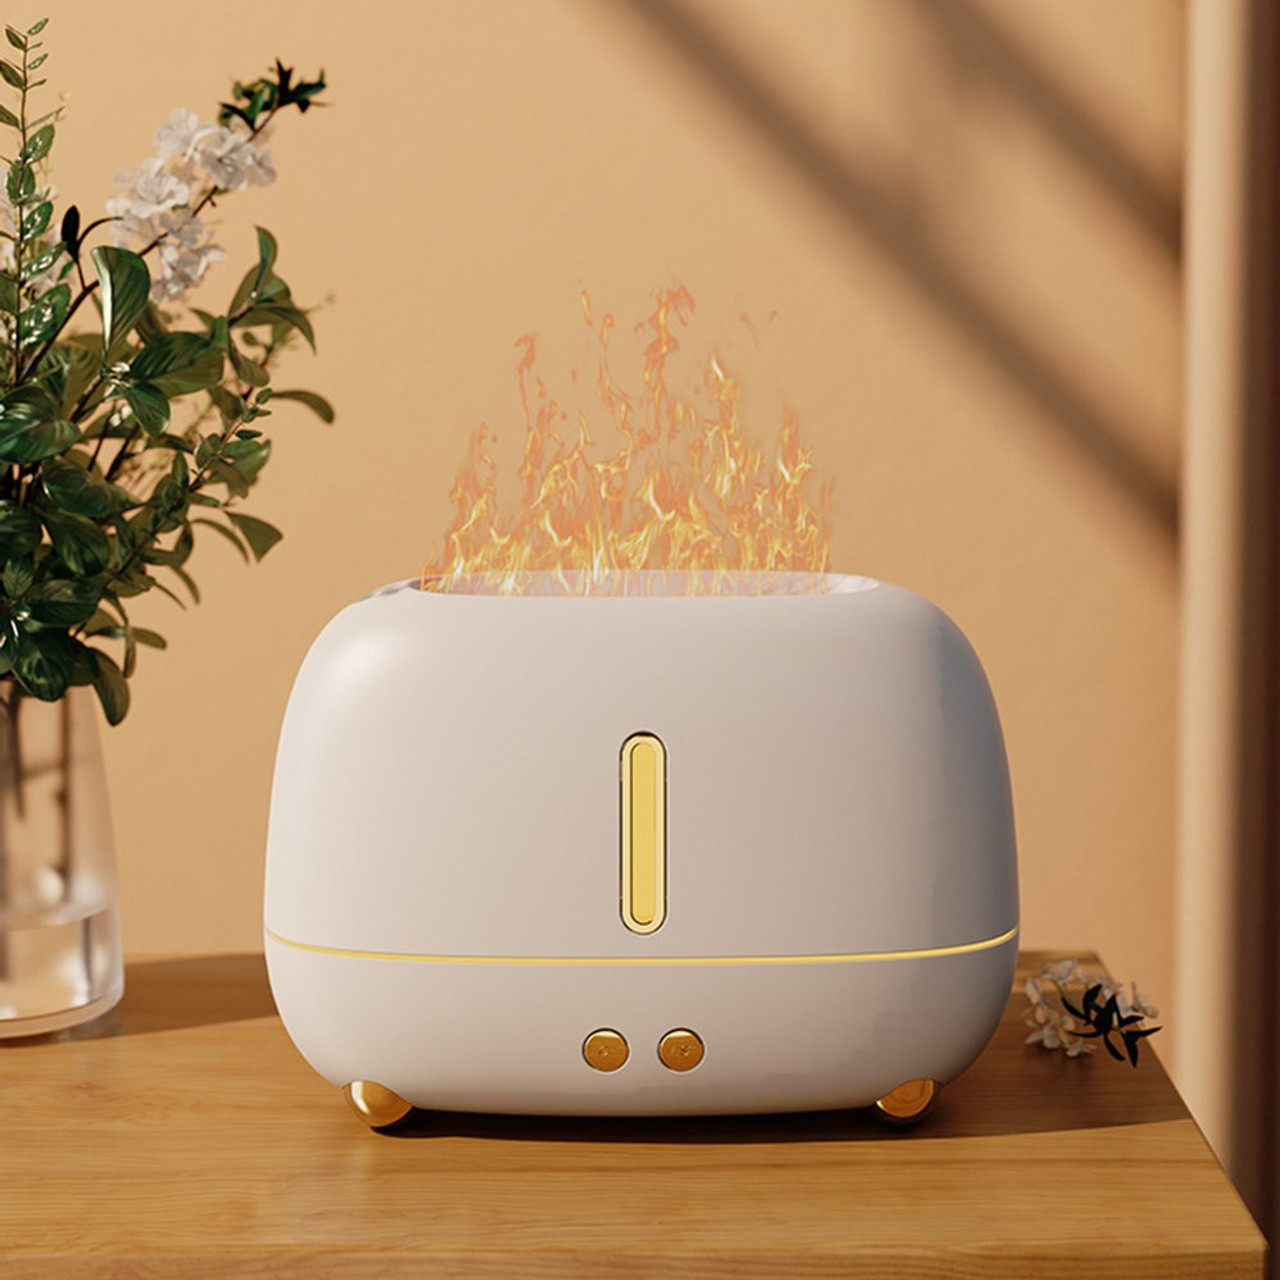 V26 Simulation Flame Colorful Light Aroma Diffuser Air Humidifier for Home,  Office